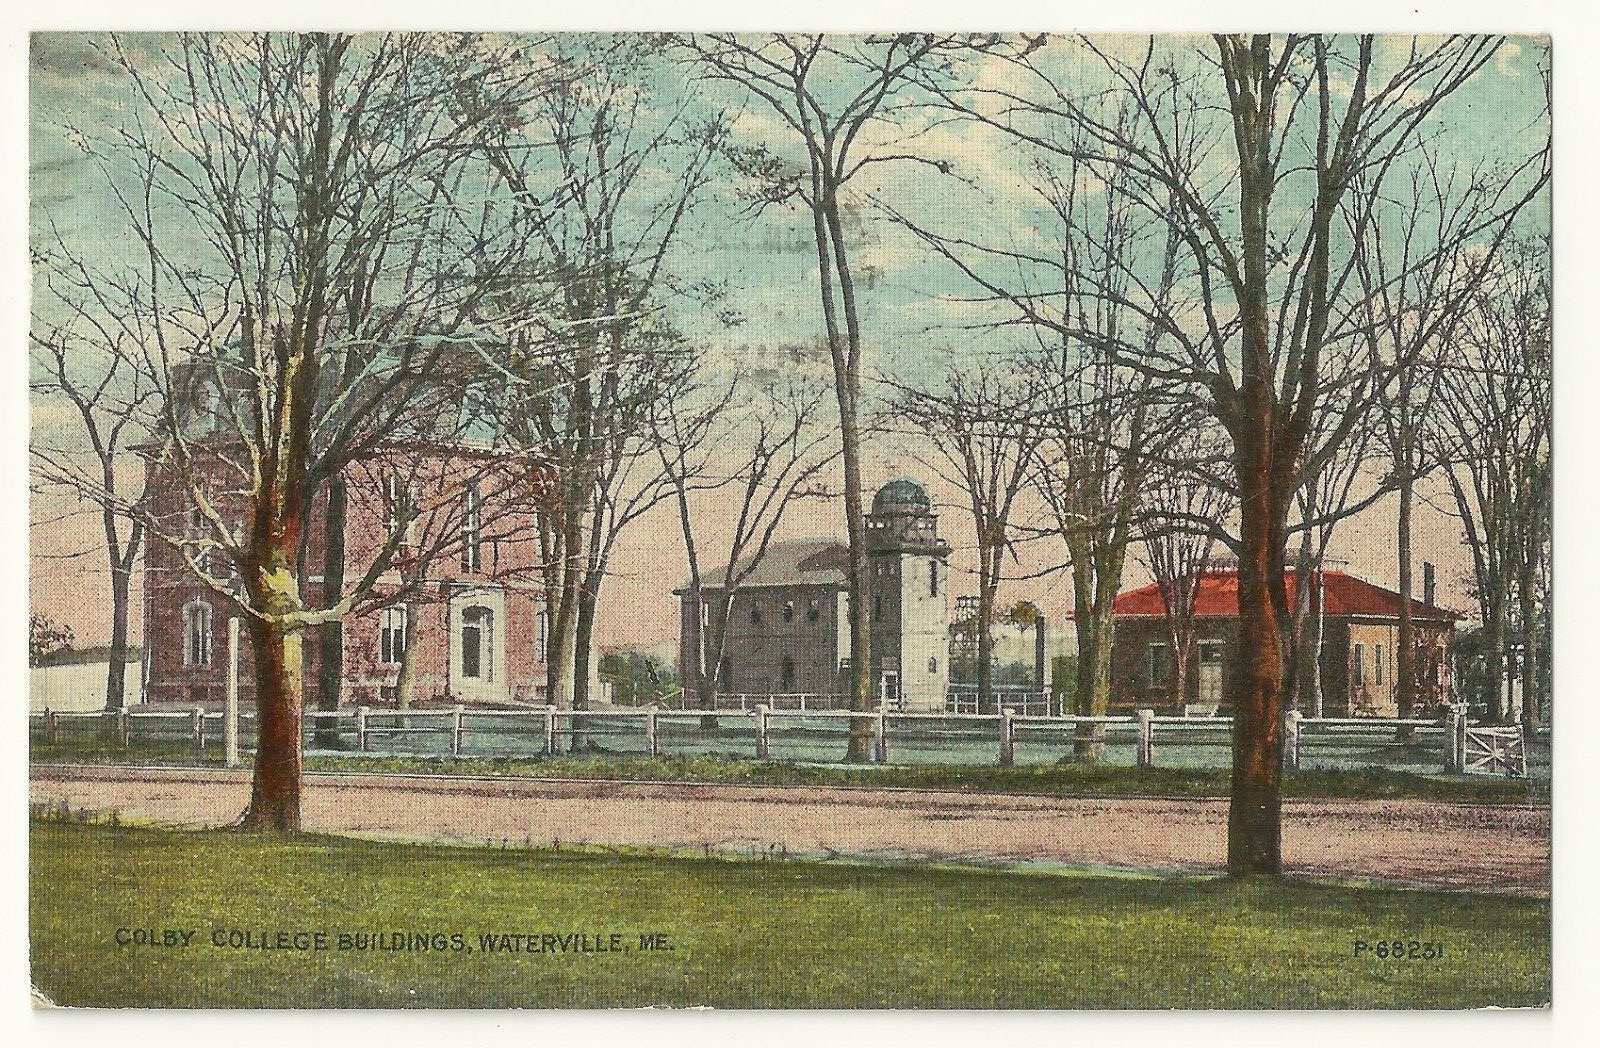 Waterville, ME  Colby College Buildings, 1910s Postcard VTG